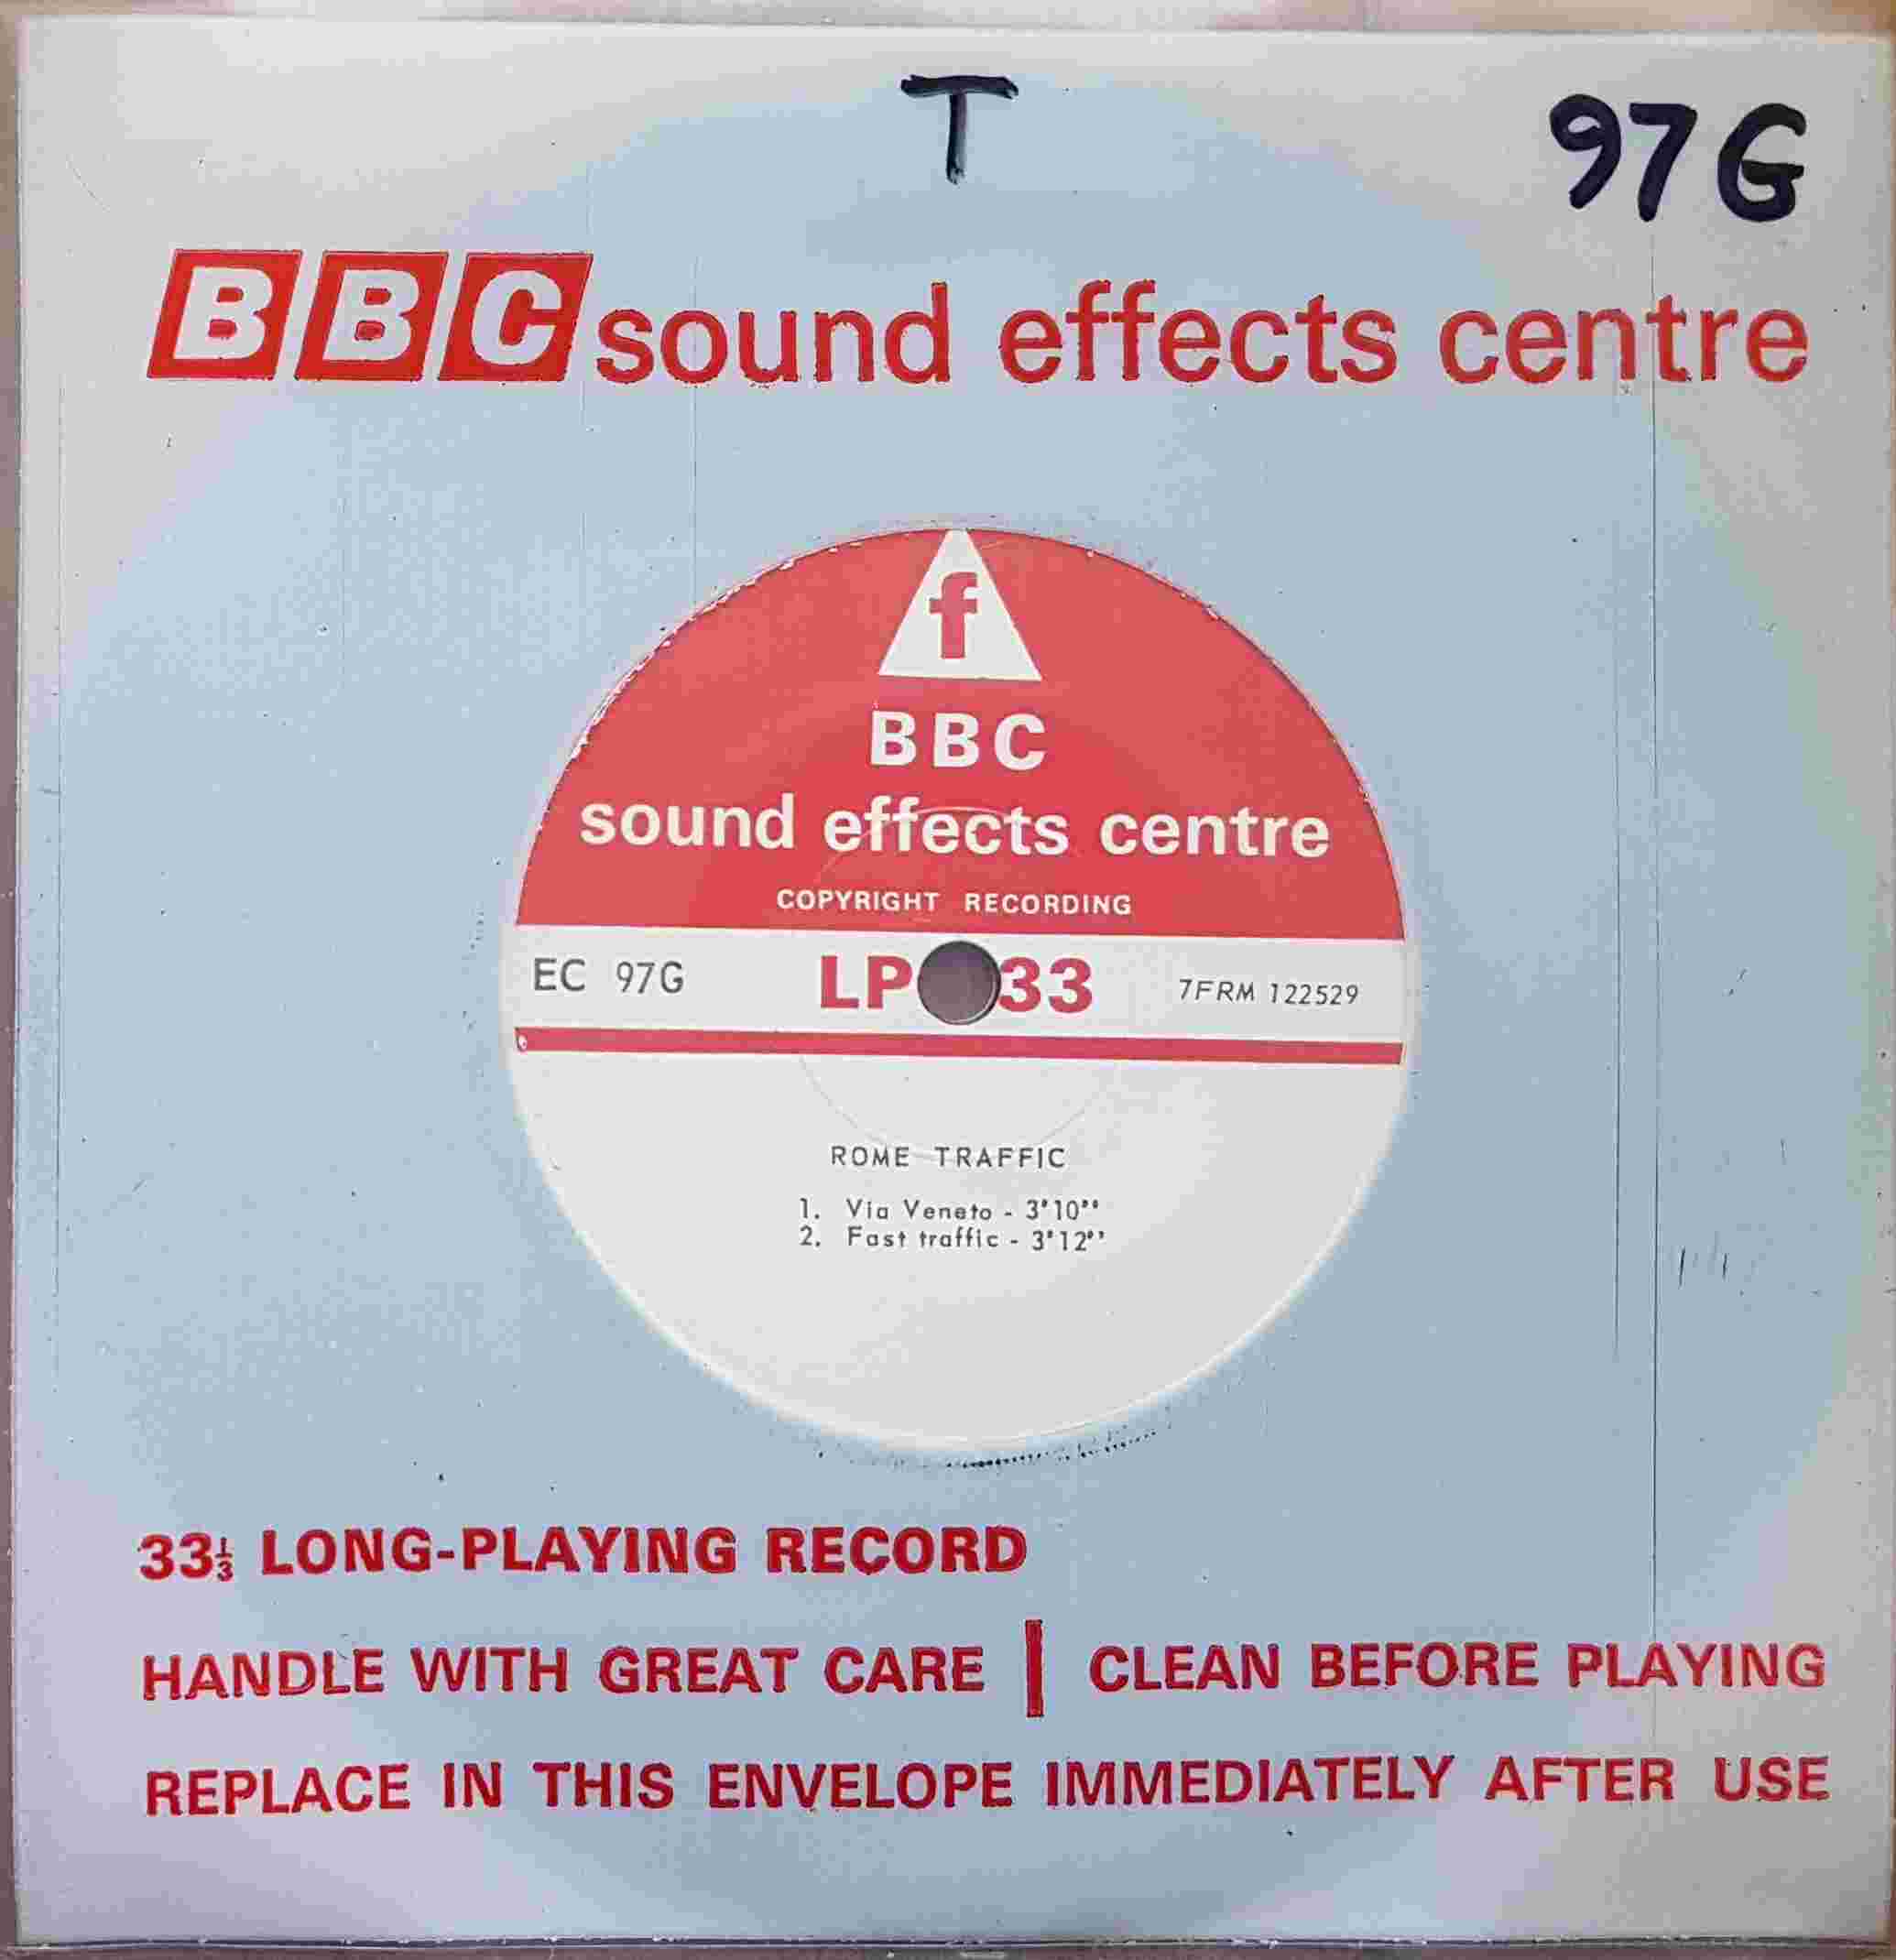 Picture of EC 97G Rome traffic by artist Not registered from the BBC singles - Records and Tapes library